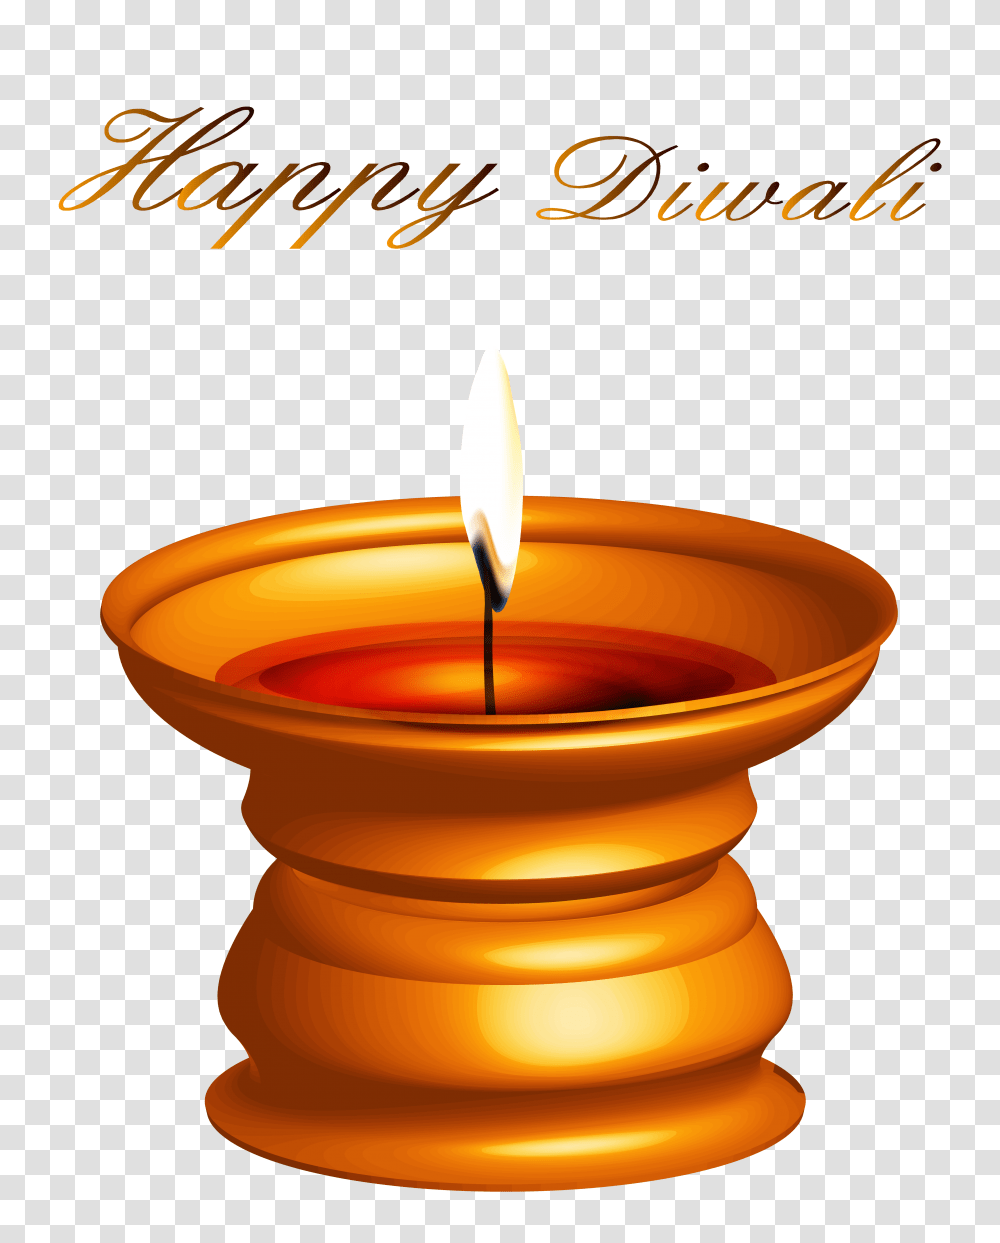 Download Diwali Free Image And Clipart Format Diwali, Candle, Fire, Flame Transparent Png